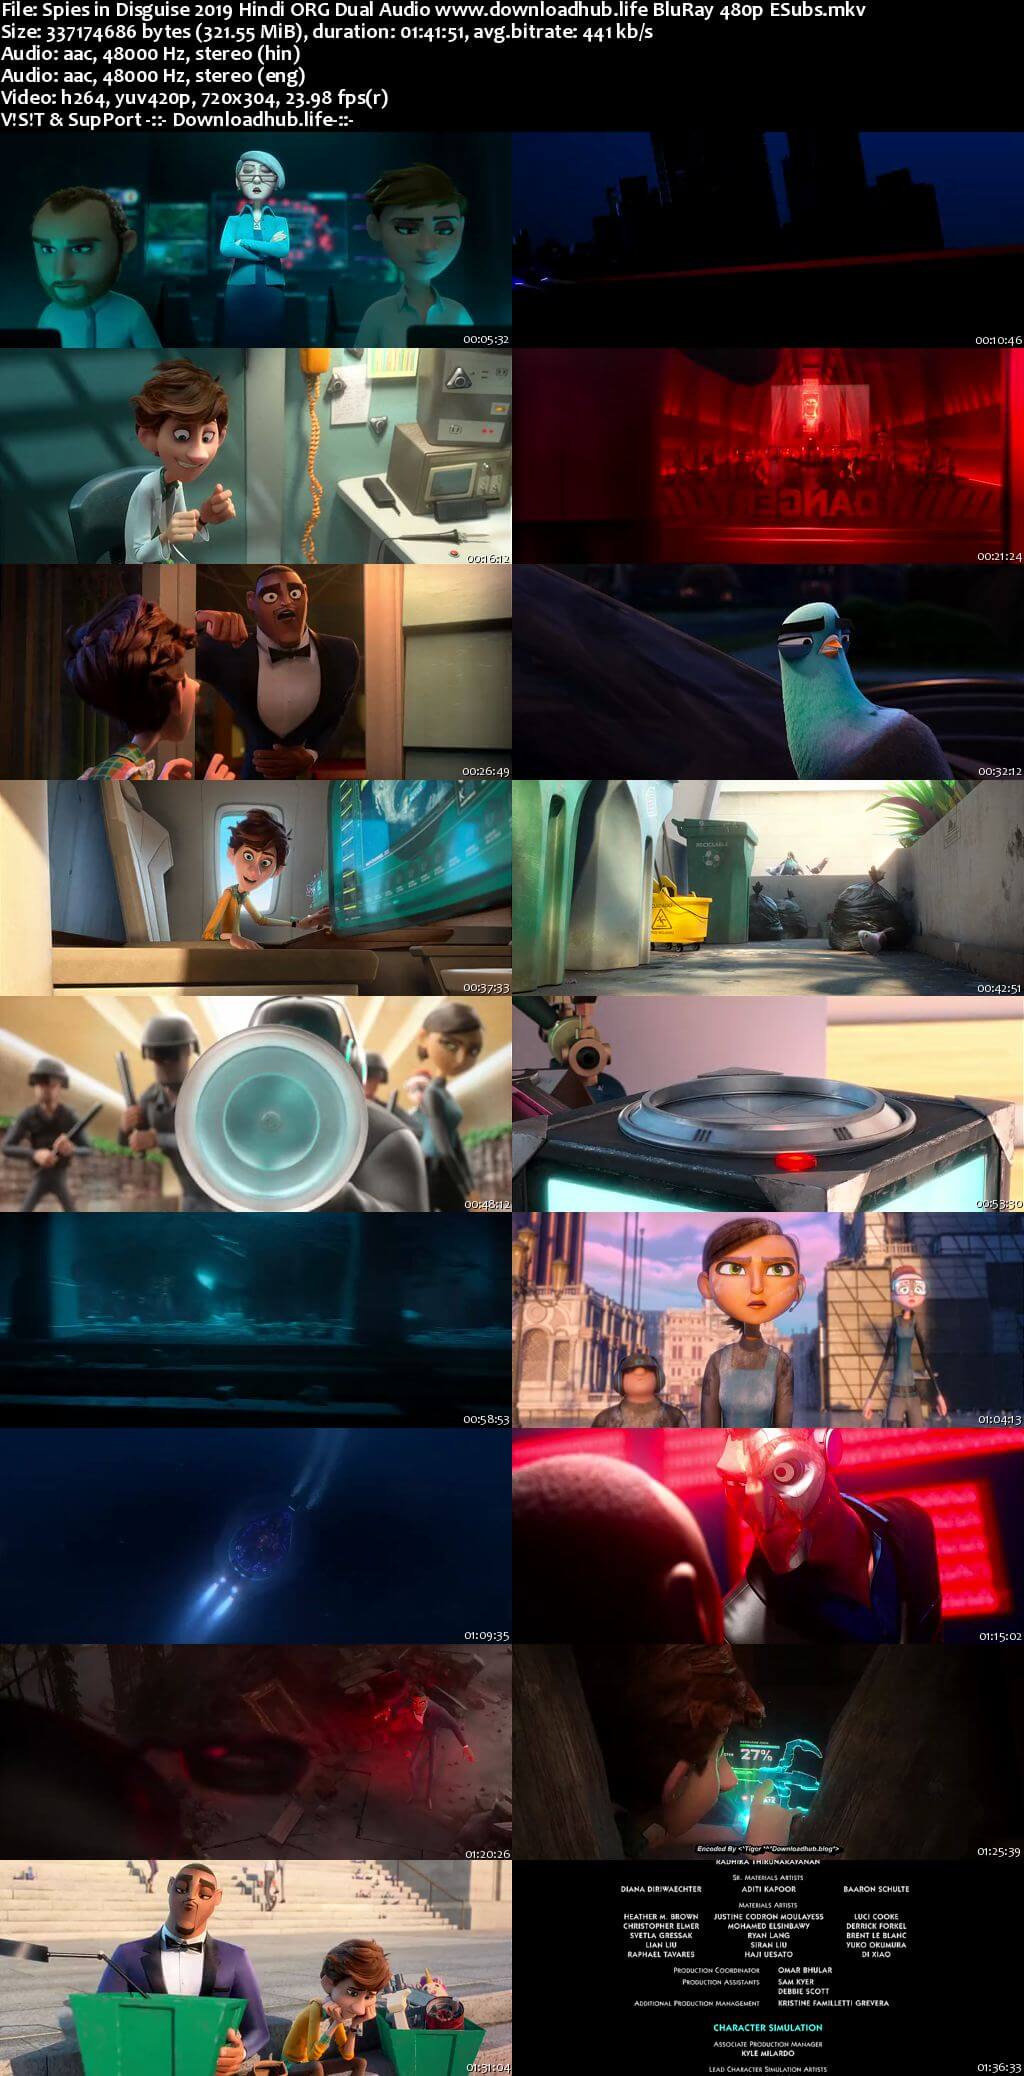 Spies in Disguise 2019 Hindi ORG Dual Audio 300MB BluRay 480p ESubs